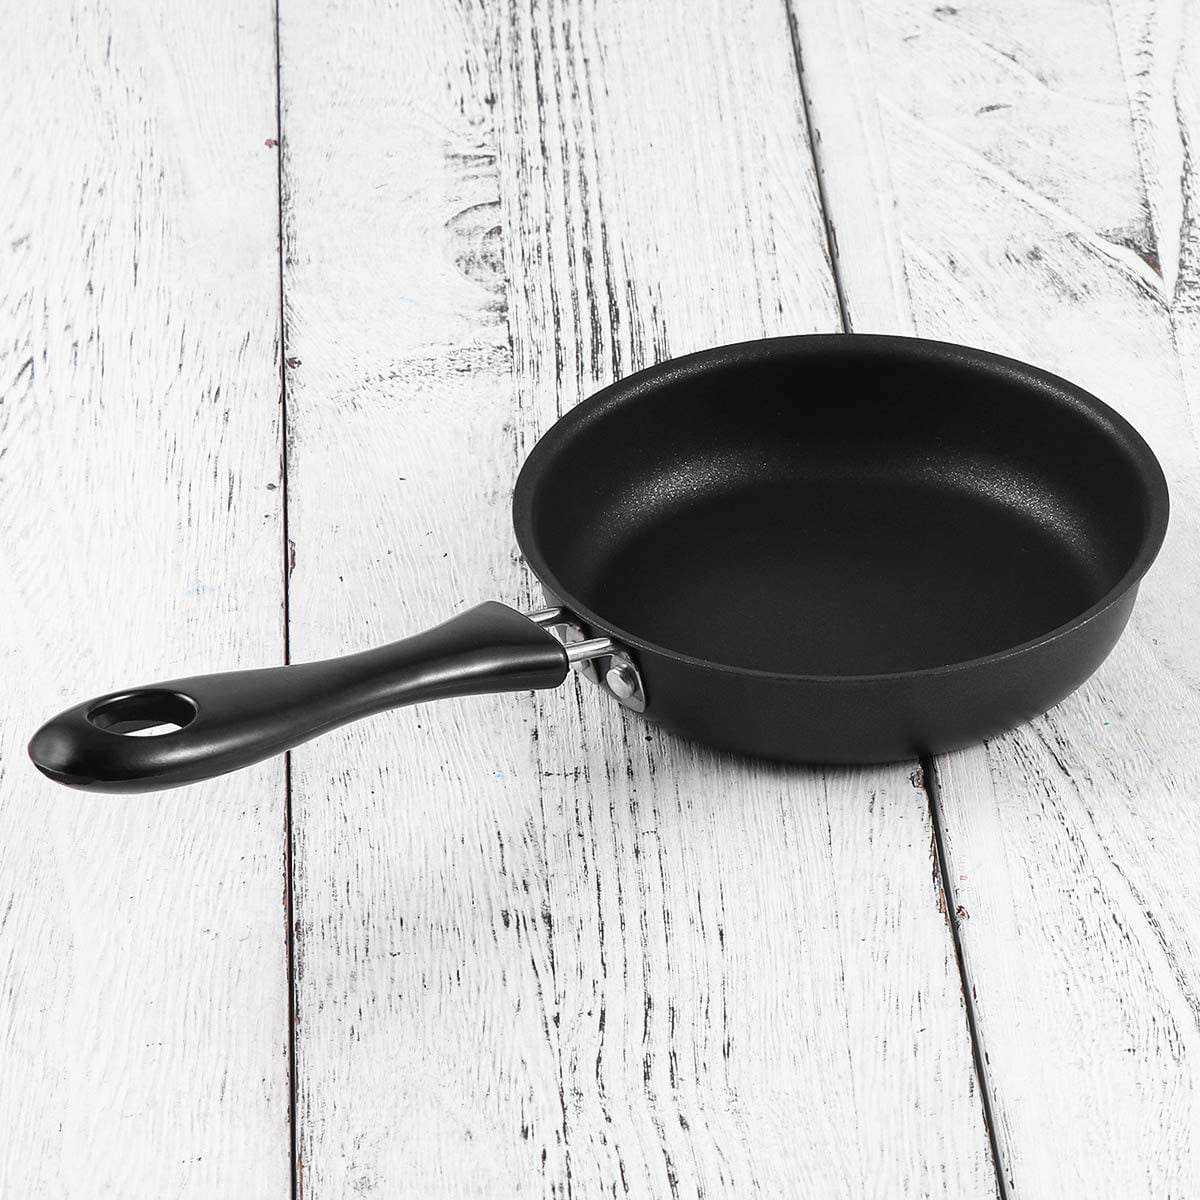 Mini Frying Pan for One Egg, 4.3 11cm Mini Egg Frying Pan with Handle Heat  Resistant Cast Iron Skillet, Portable Camping Outdoor Cooking Cast Iron